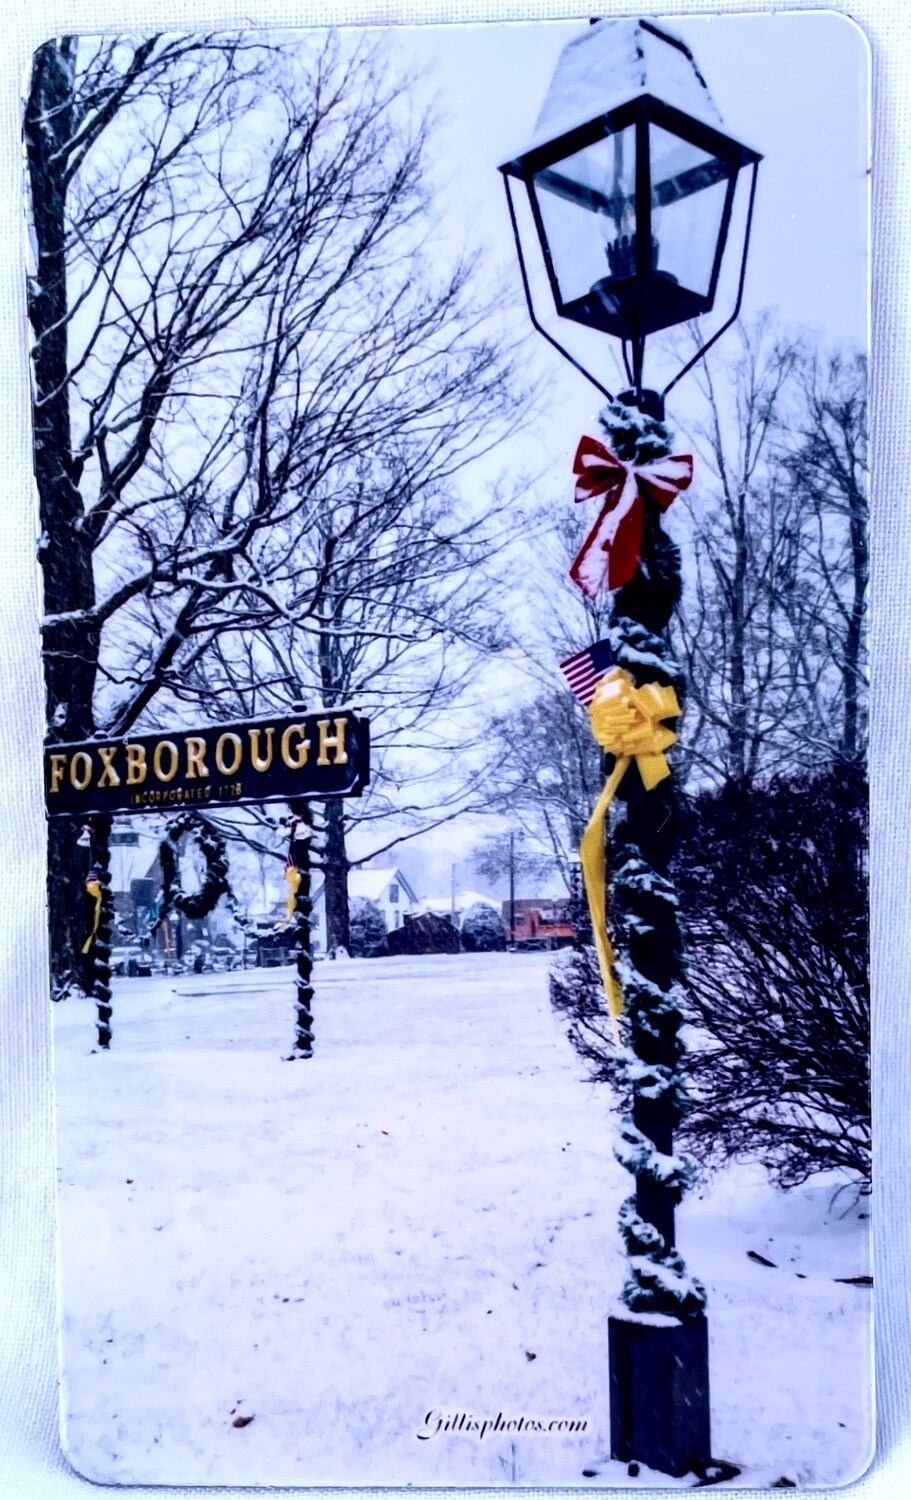 3"x 2" Photo Magnet of Image of Foxboro Common Old Lamp Post and Iconic Foxboro Sign.